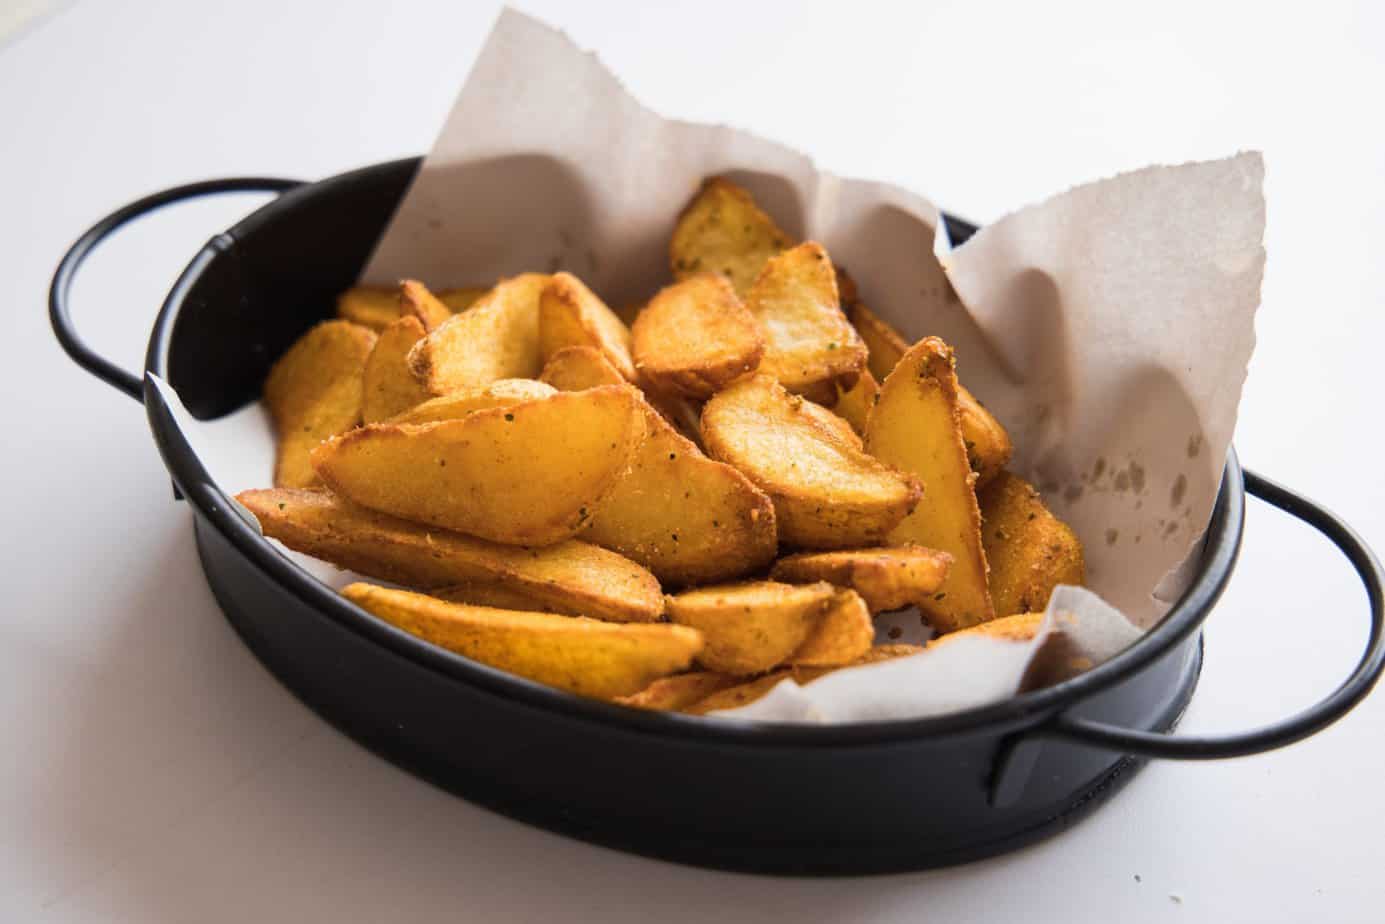 Potatoe Wedges- What is the most unhealthy food